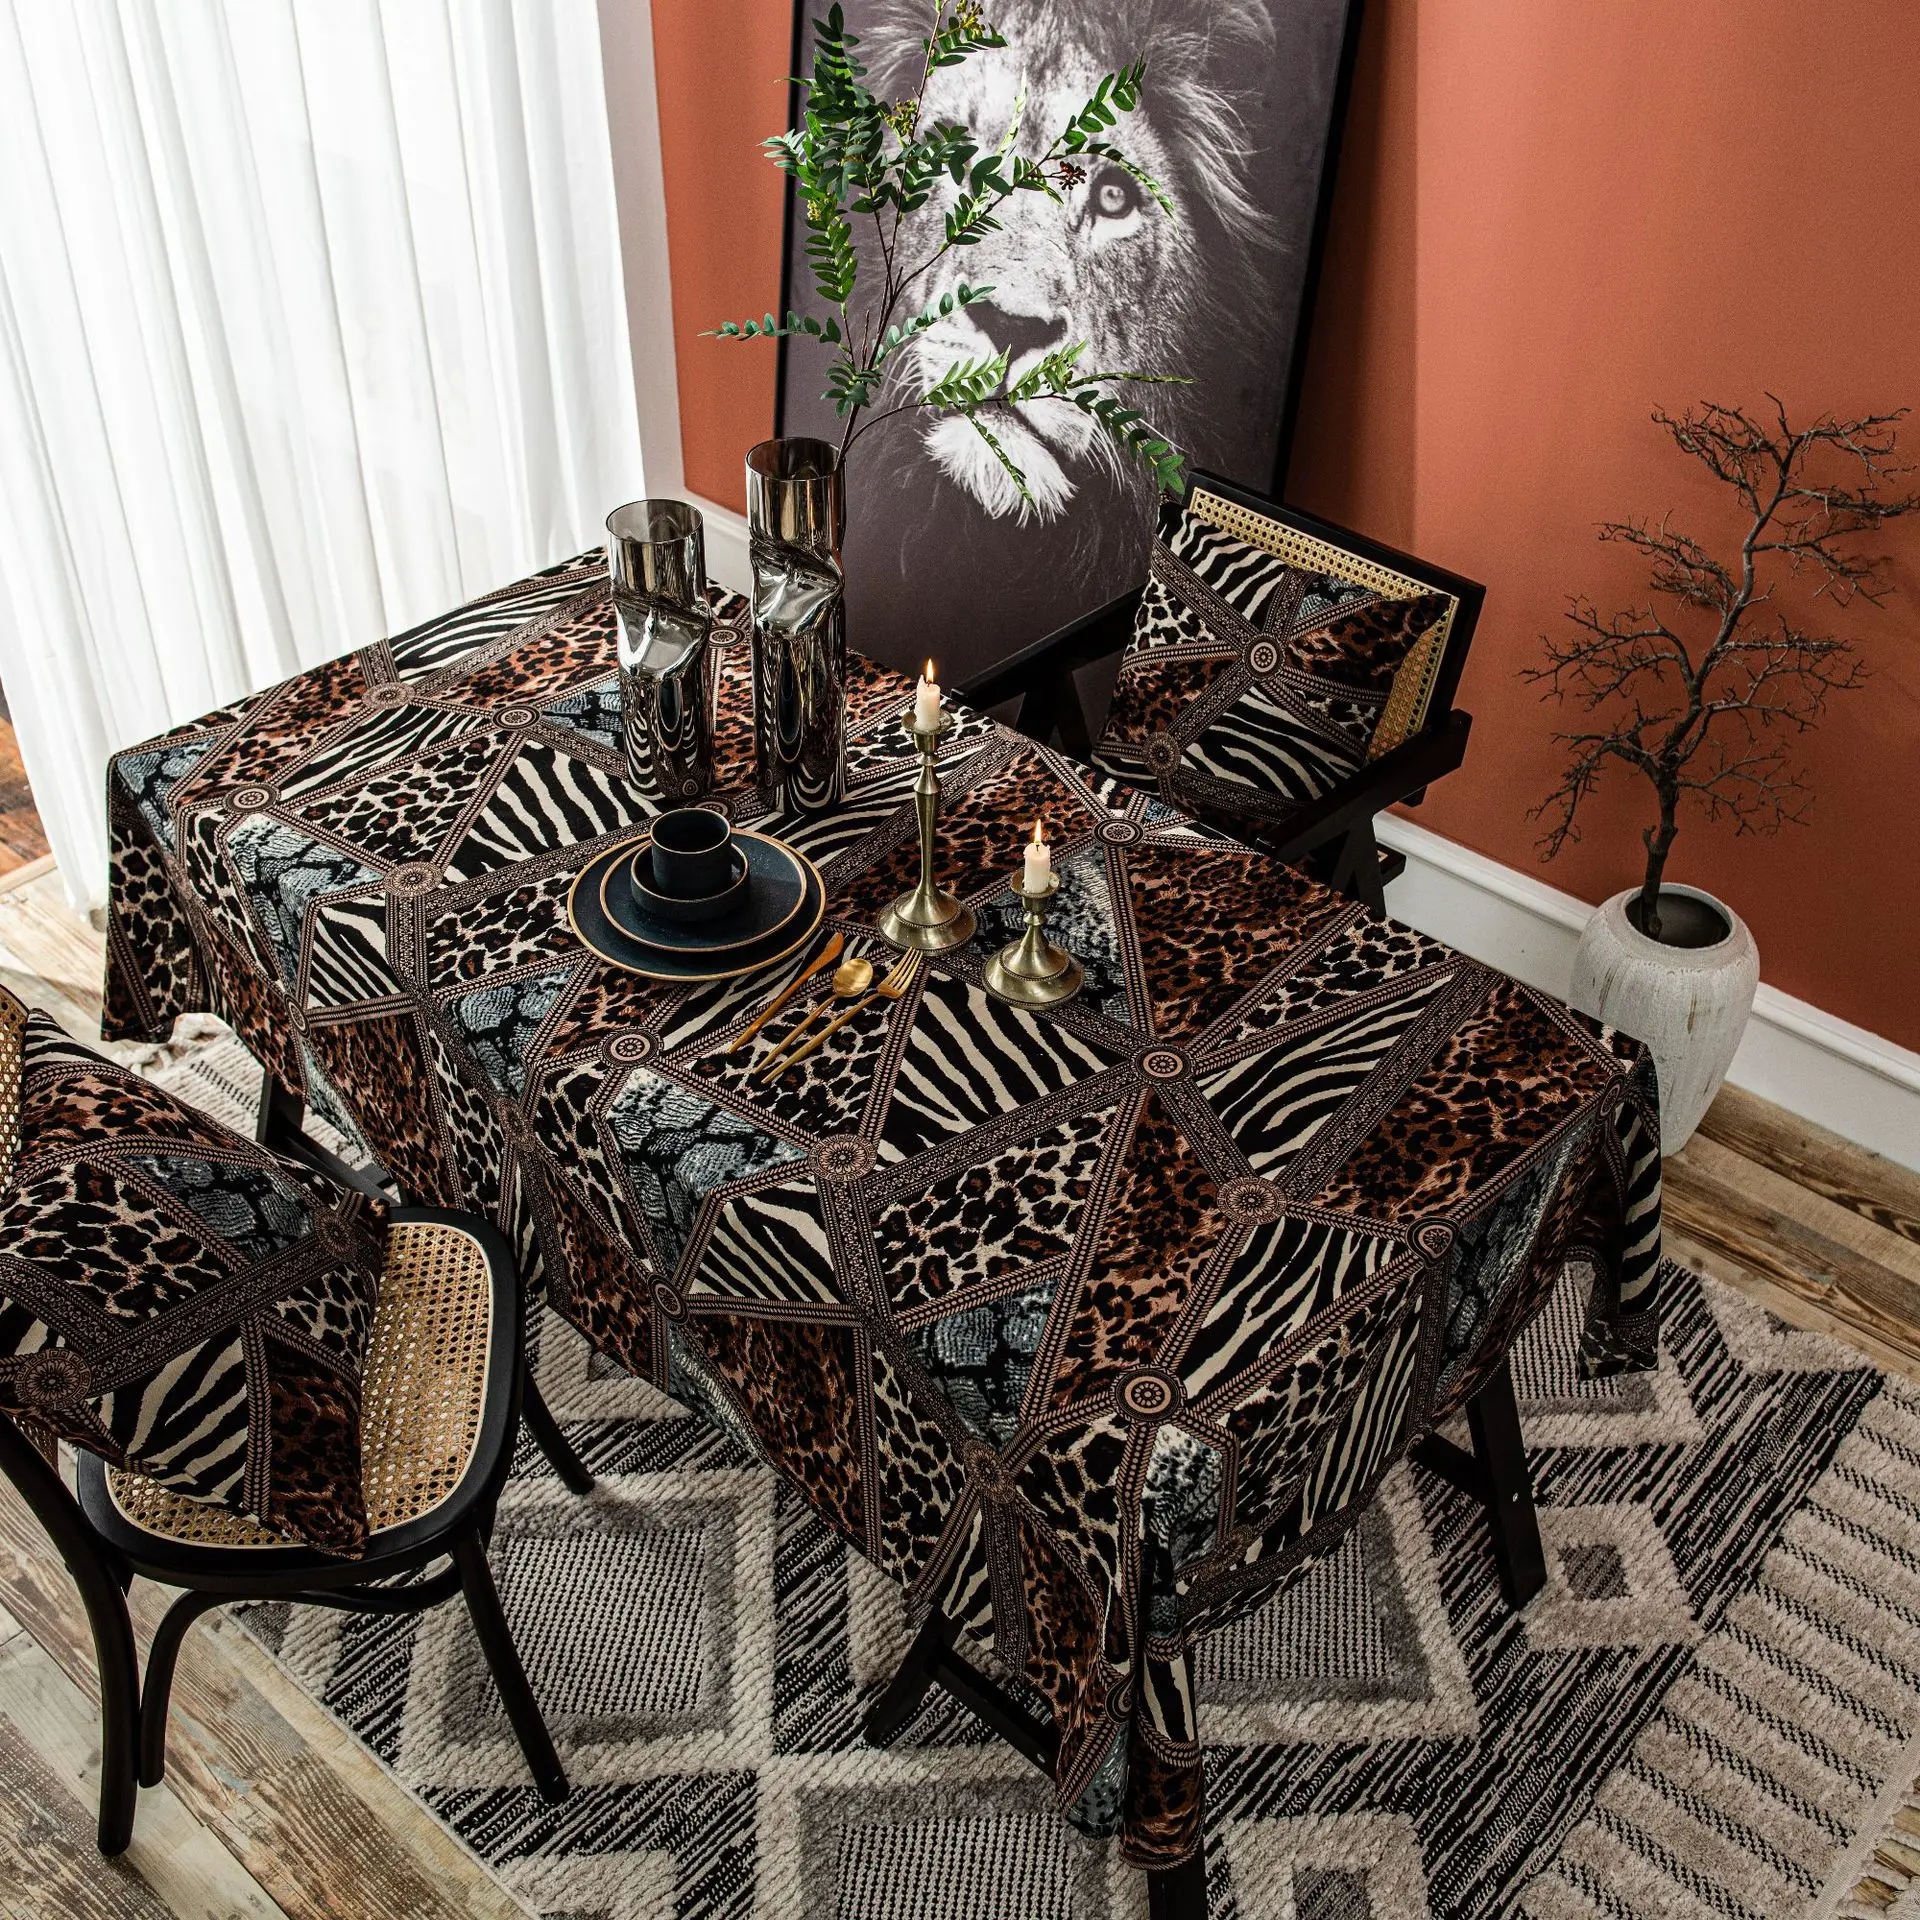 

Leopard Print Table Cloths Rectangle African Animal Cheetah Wildlife Spotted Tablecloths Decoration Picnic Tablecloth Dust-Proof